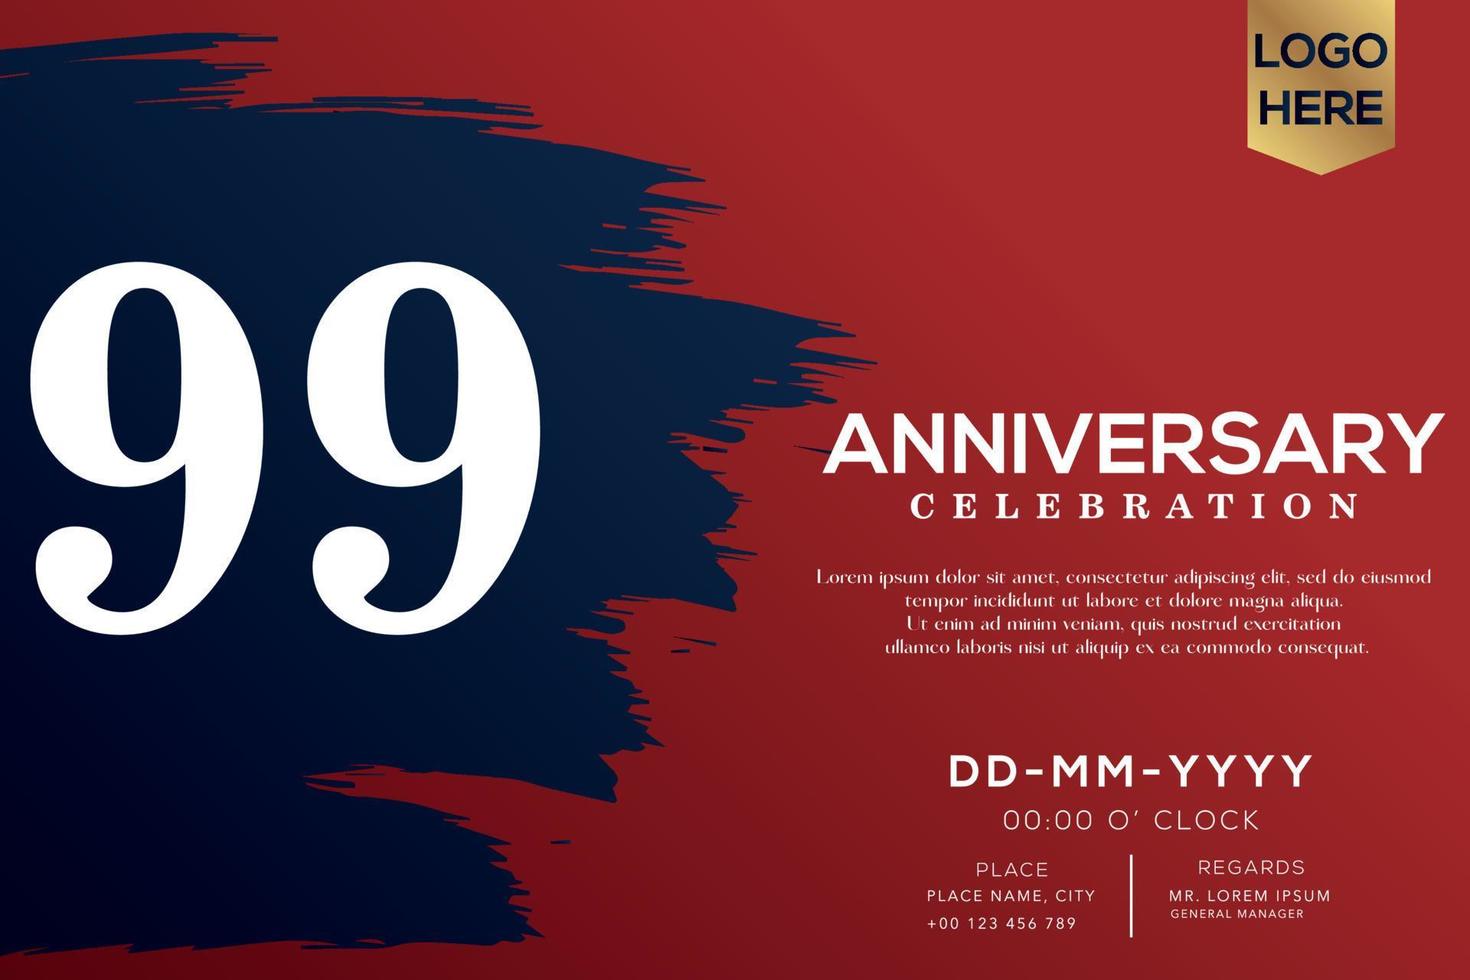 99 years anniversary celebration vector with blue brush isolated on red background with text template design